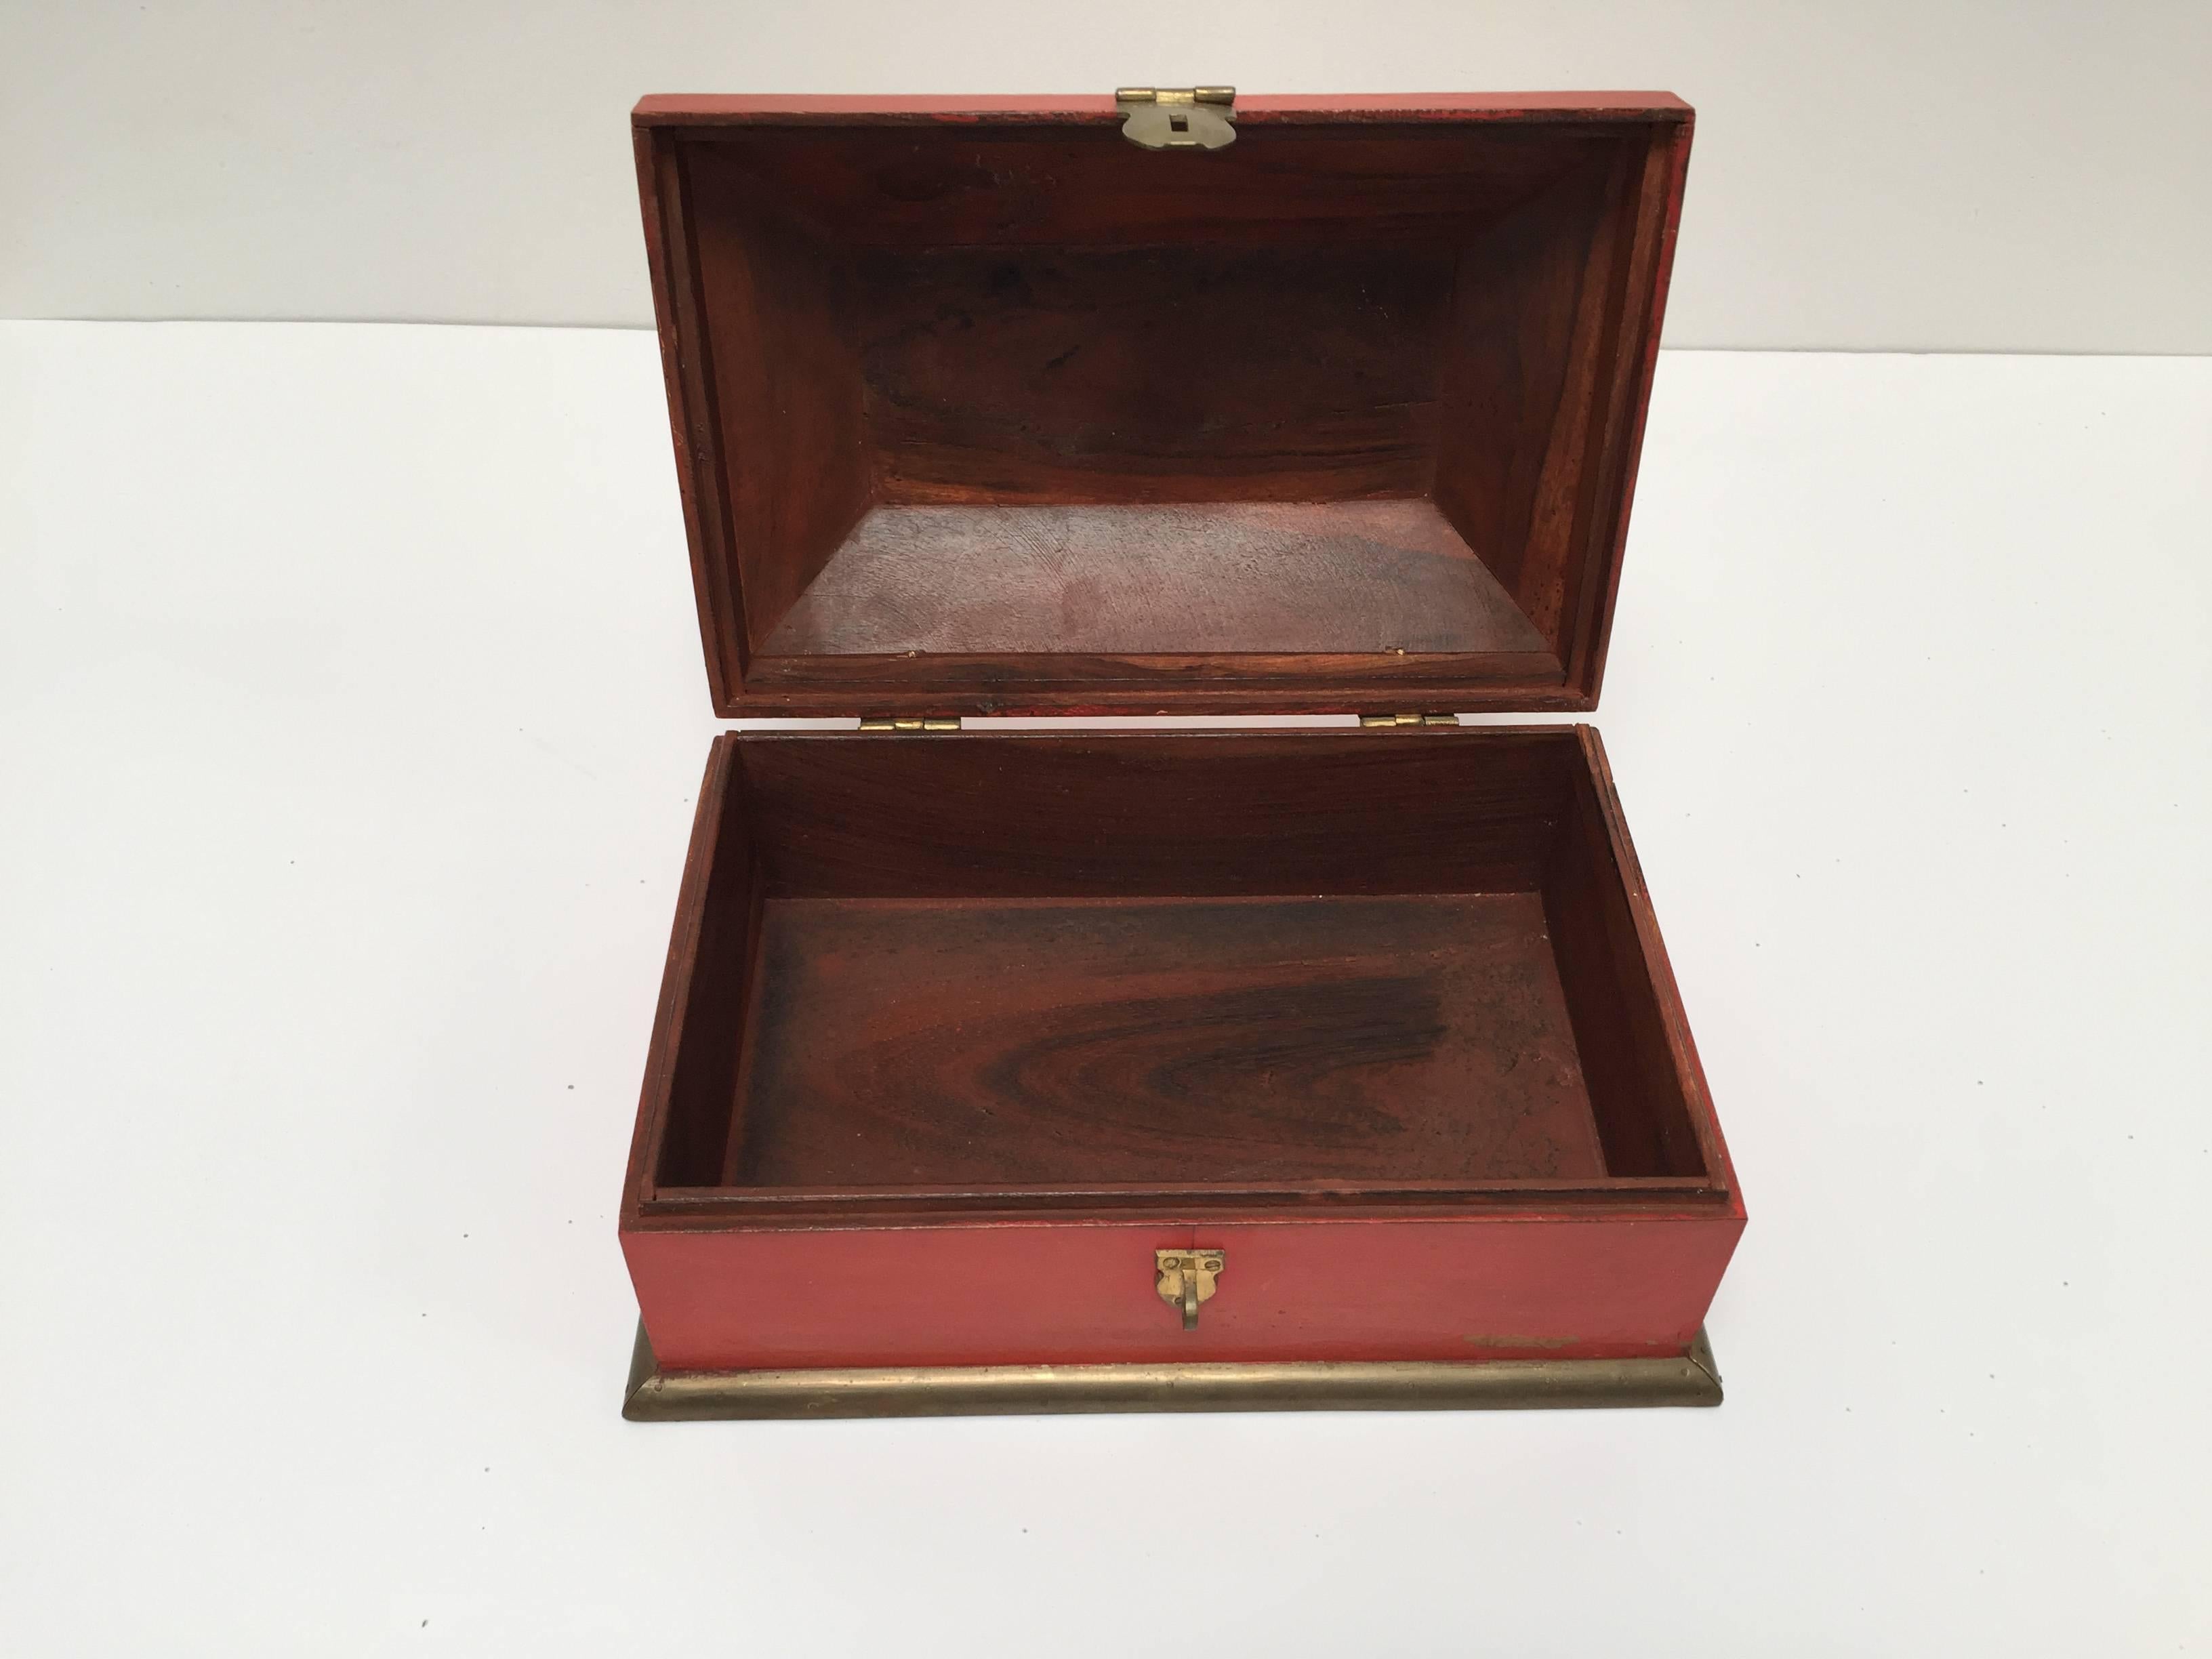 Hand-Crafted Anglo Indian Decorative Red Tea Caddy Box